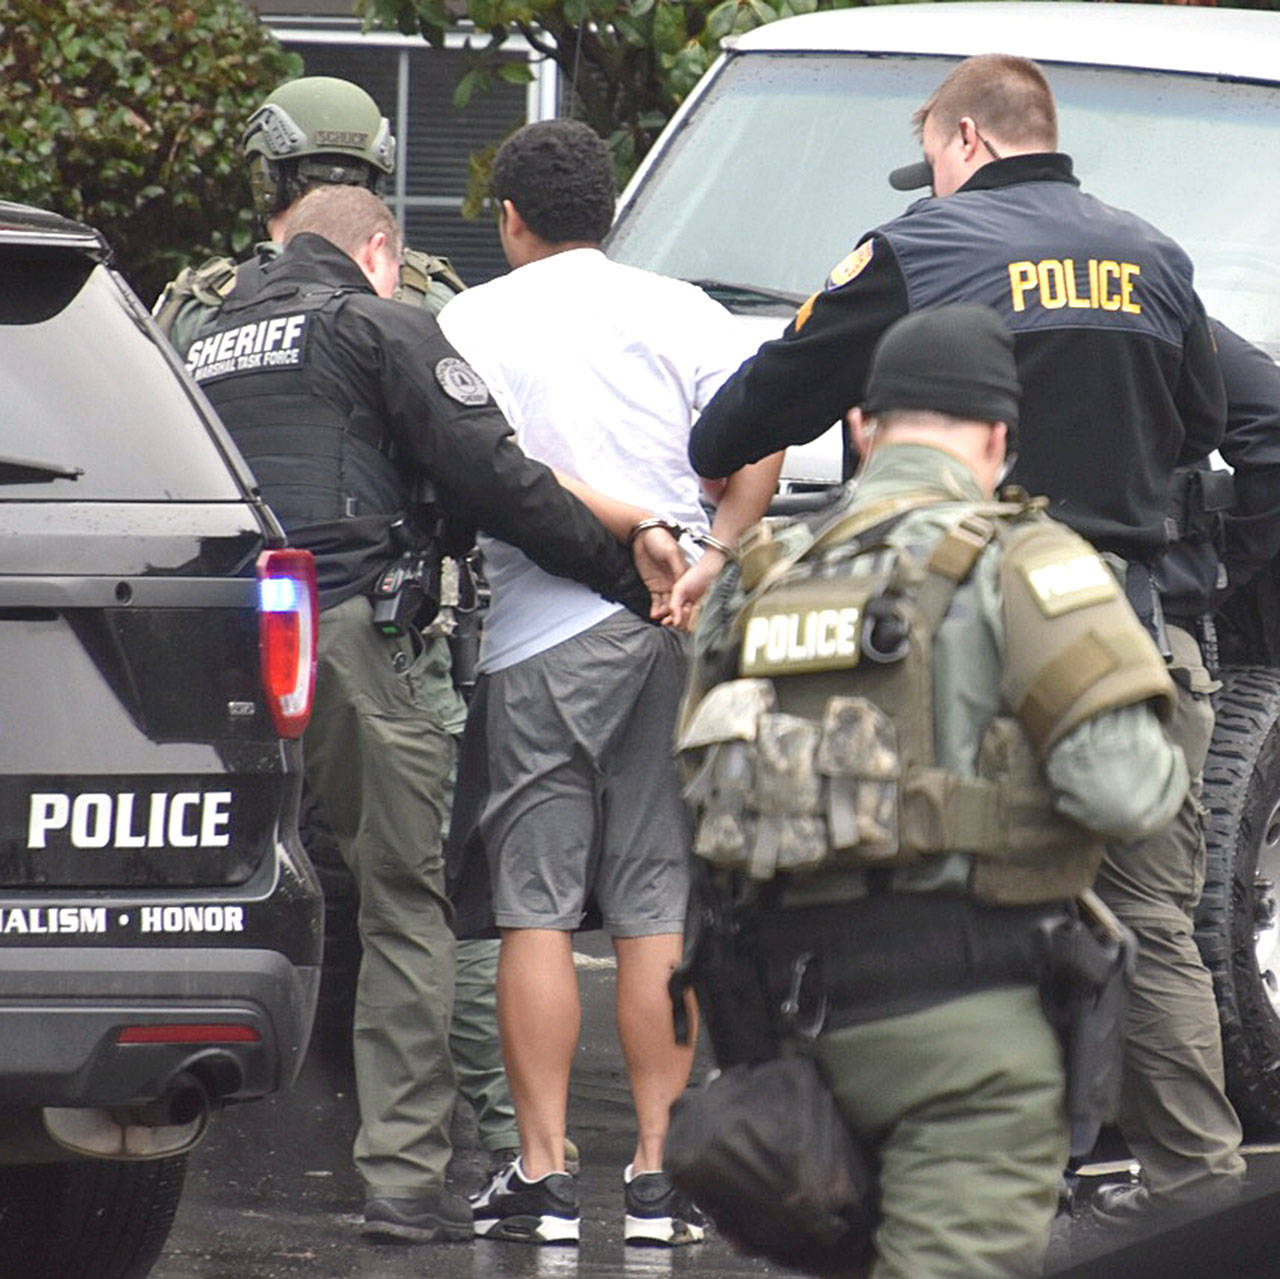 Police arrest a suspect at an apartment building south of Everett on Thursday. (Caleb Hutton / The Herald)